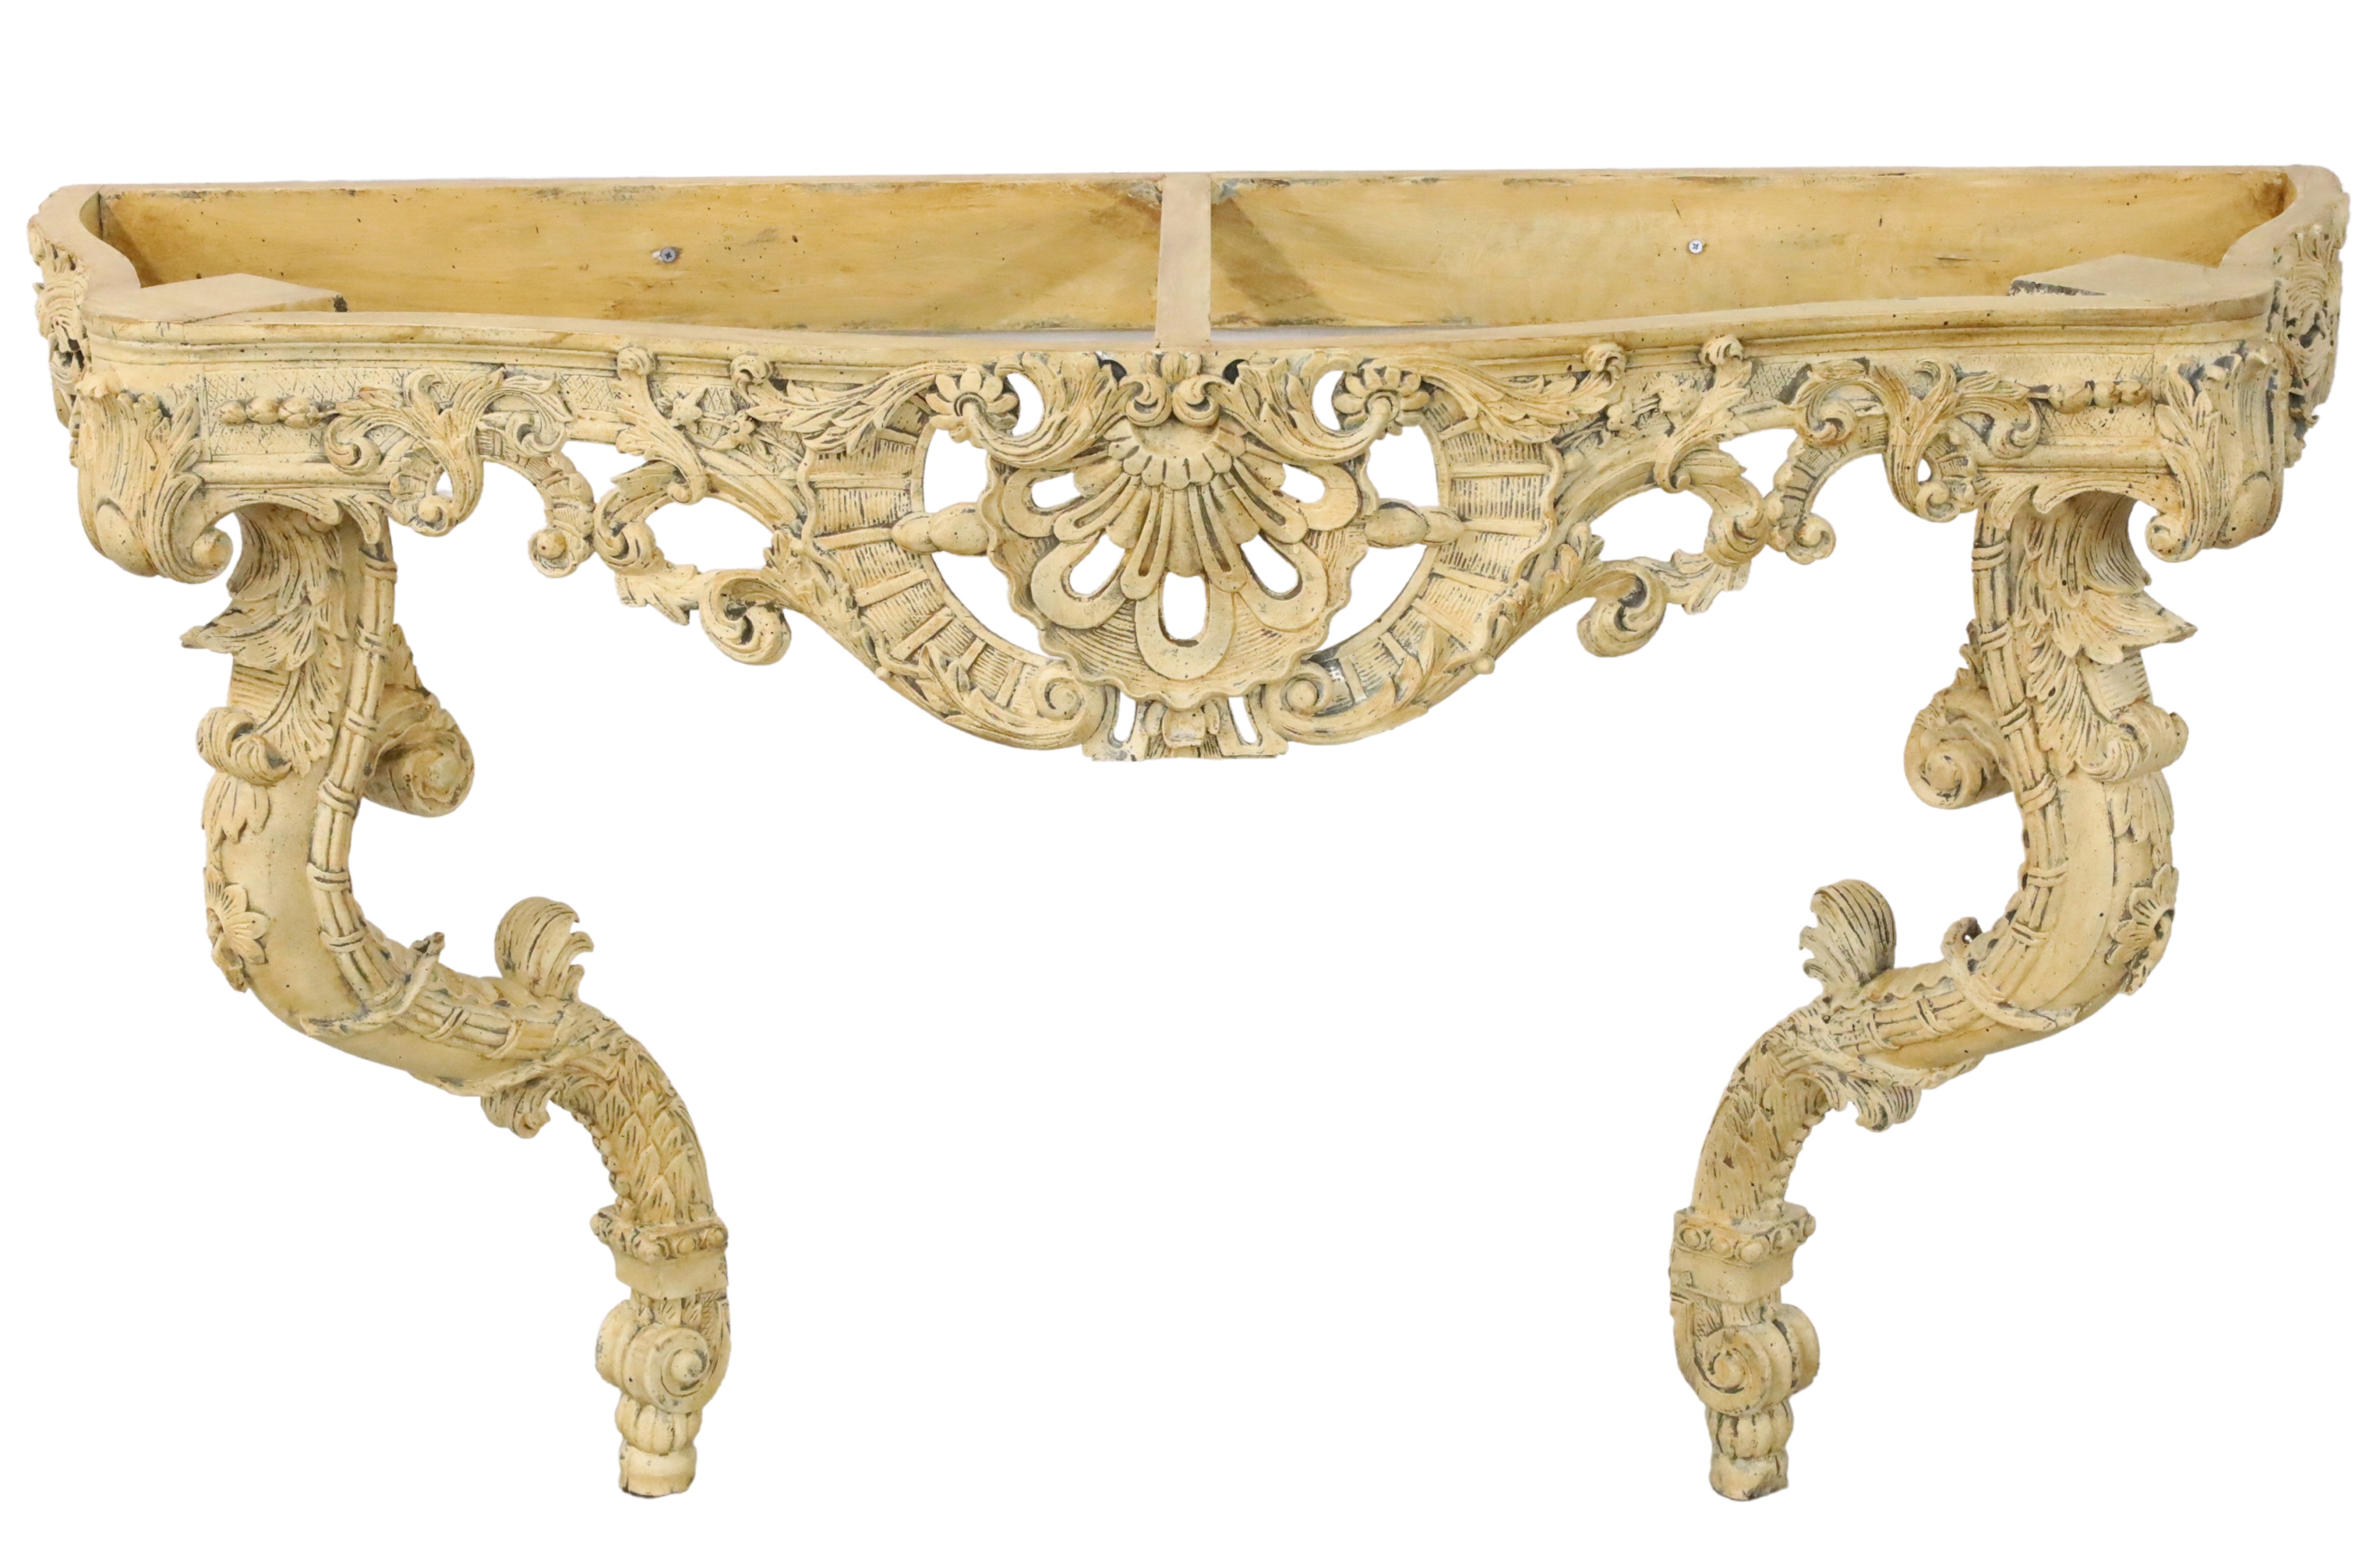 LOUIS XV STYLE CARVED WOOD CONSOLE 2a5b04